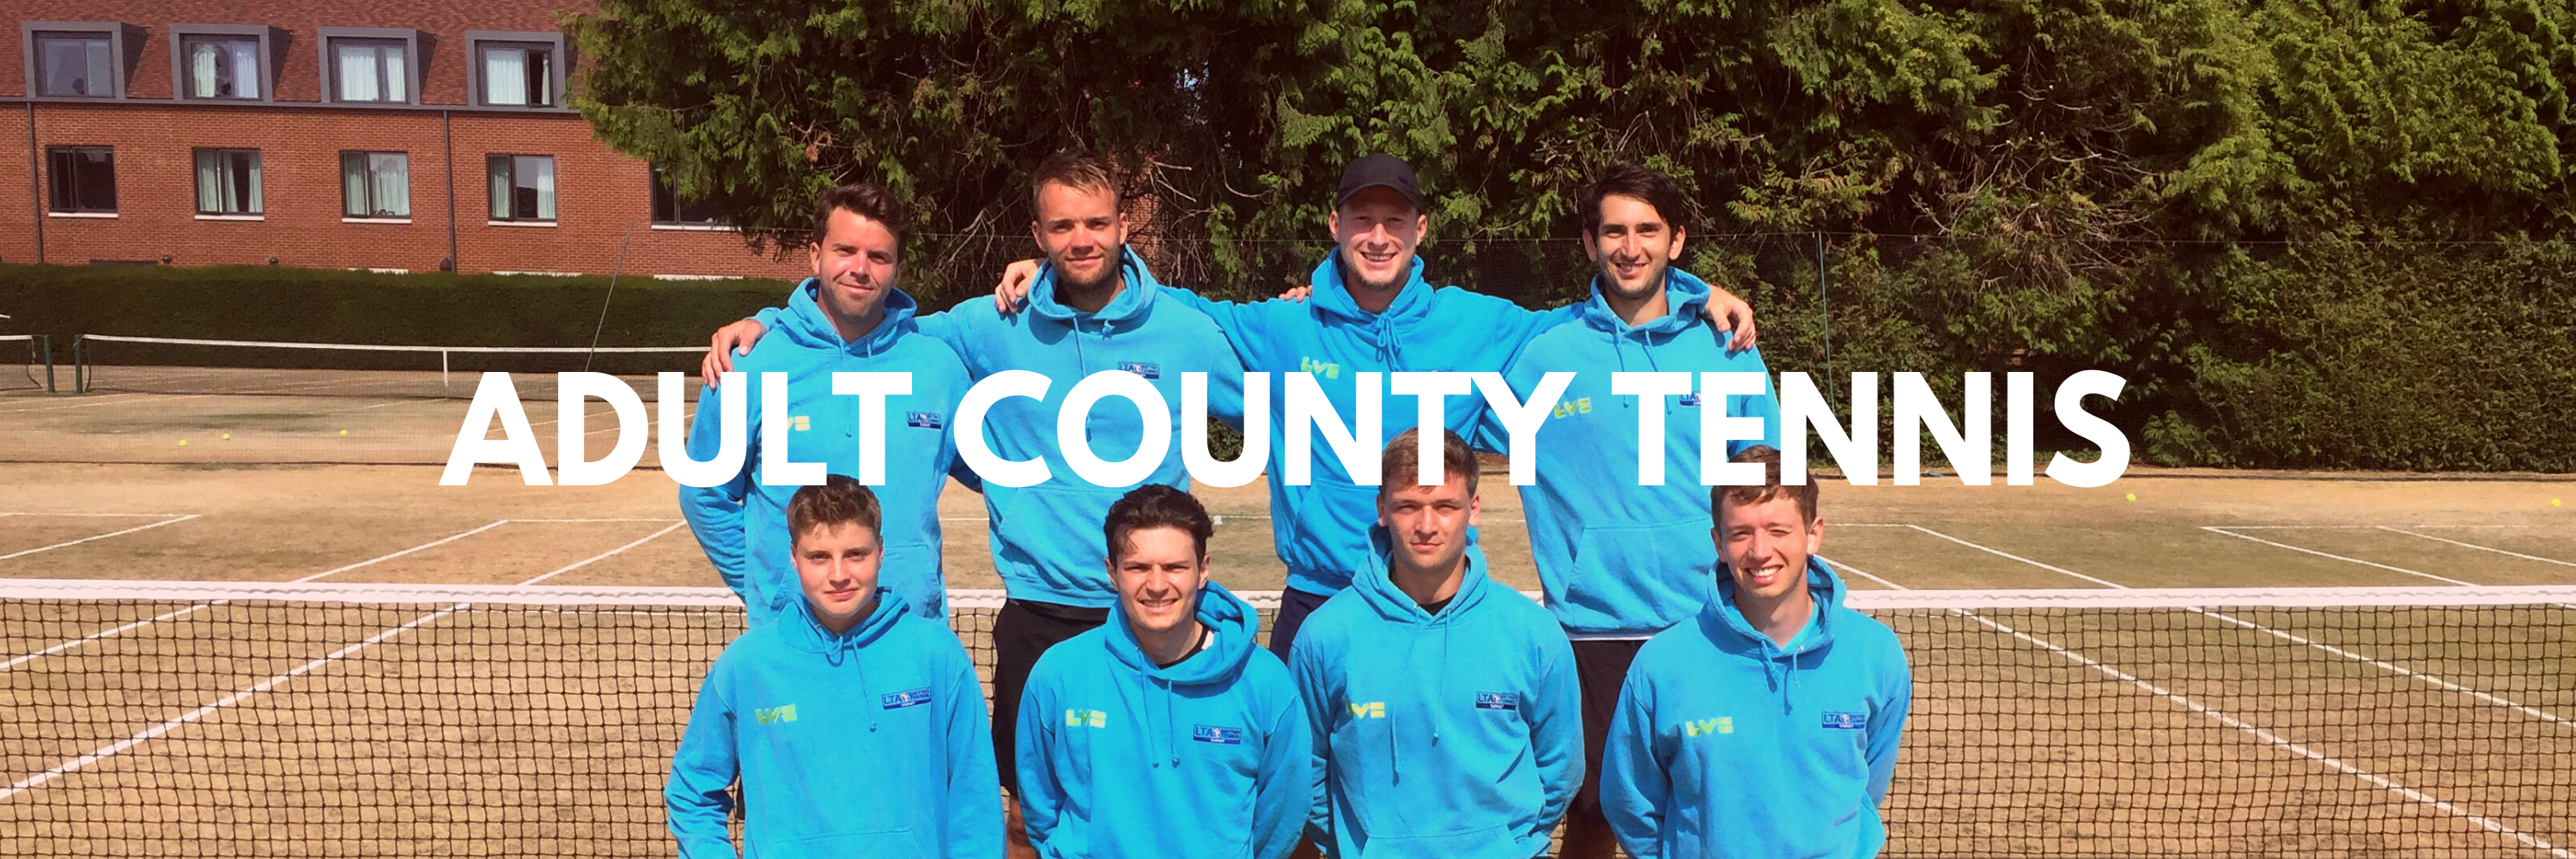 adult county tennis